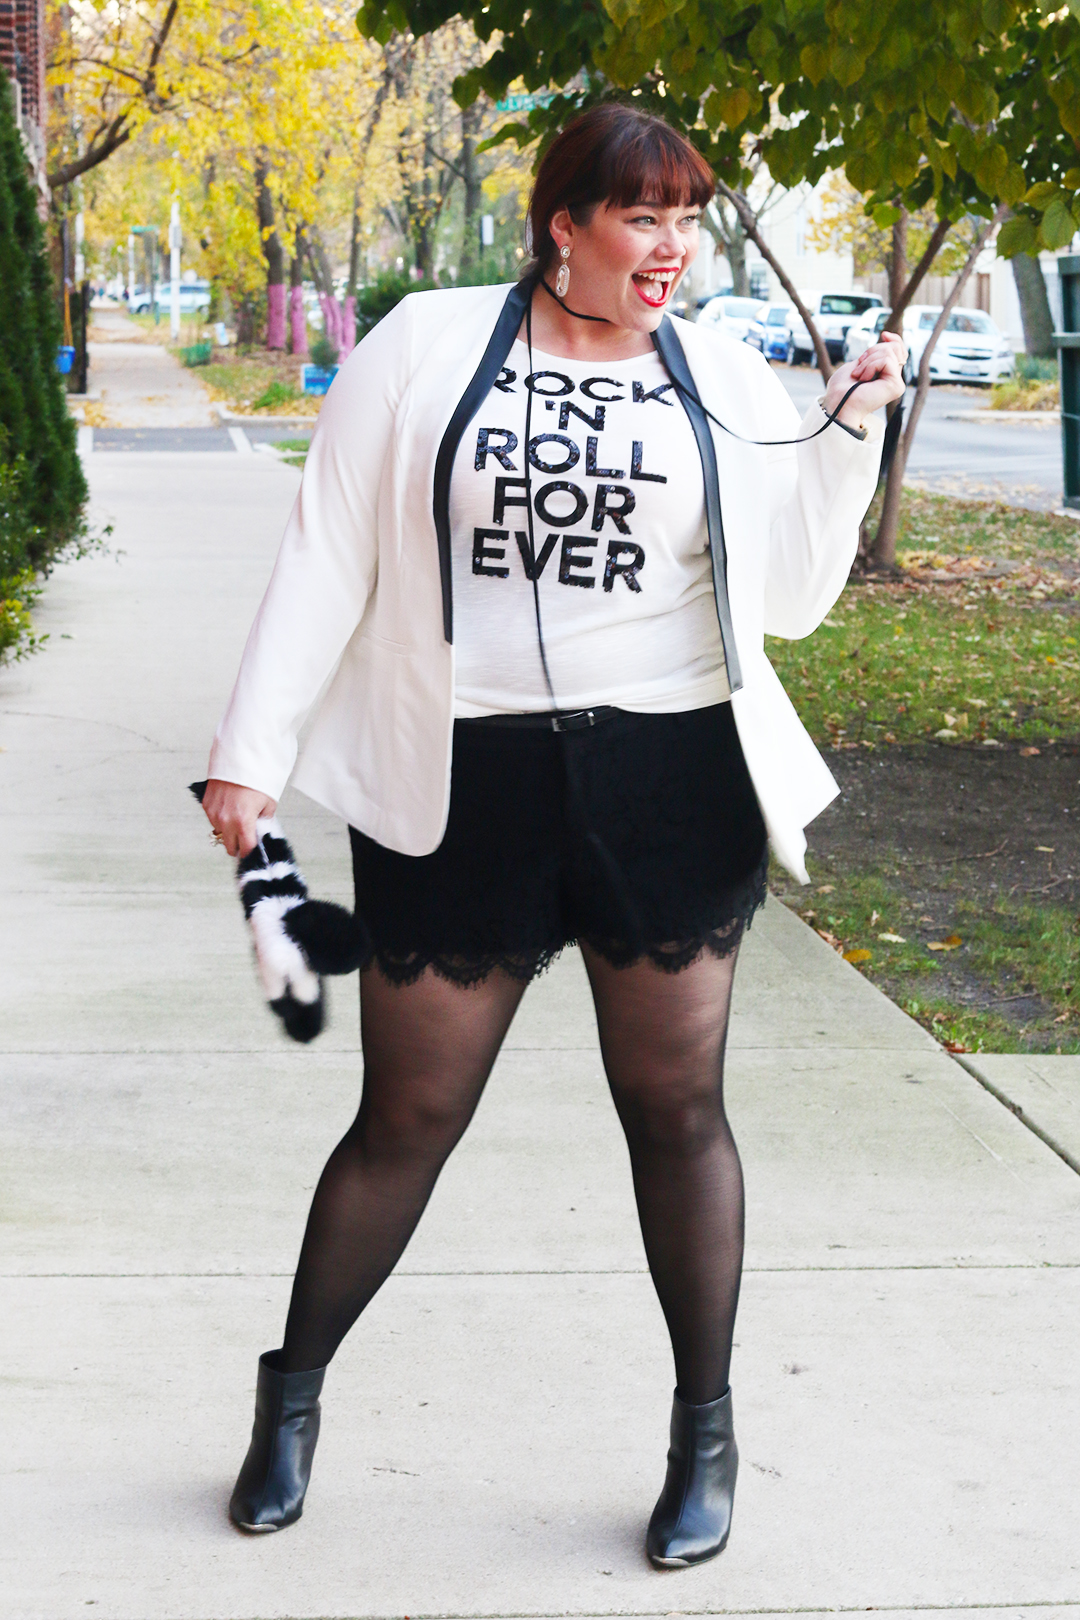 Plus Size Holiday Looks from Torrid: Rock 'n Roll Tshirt